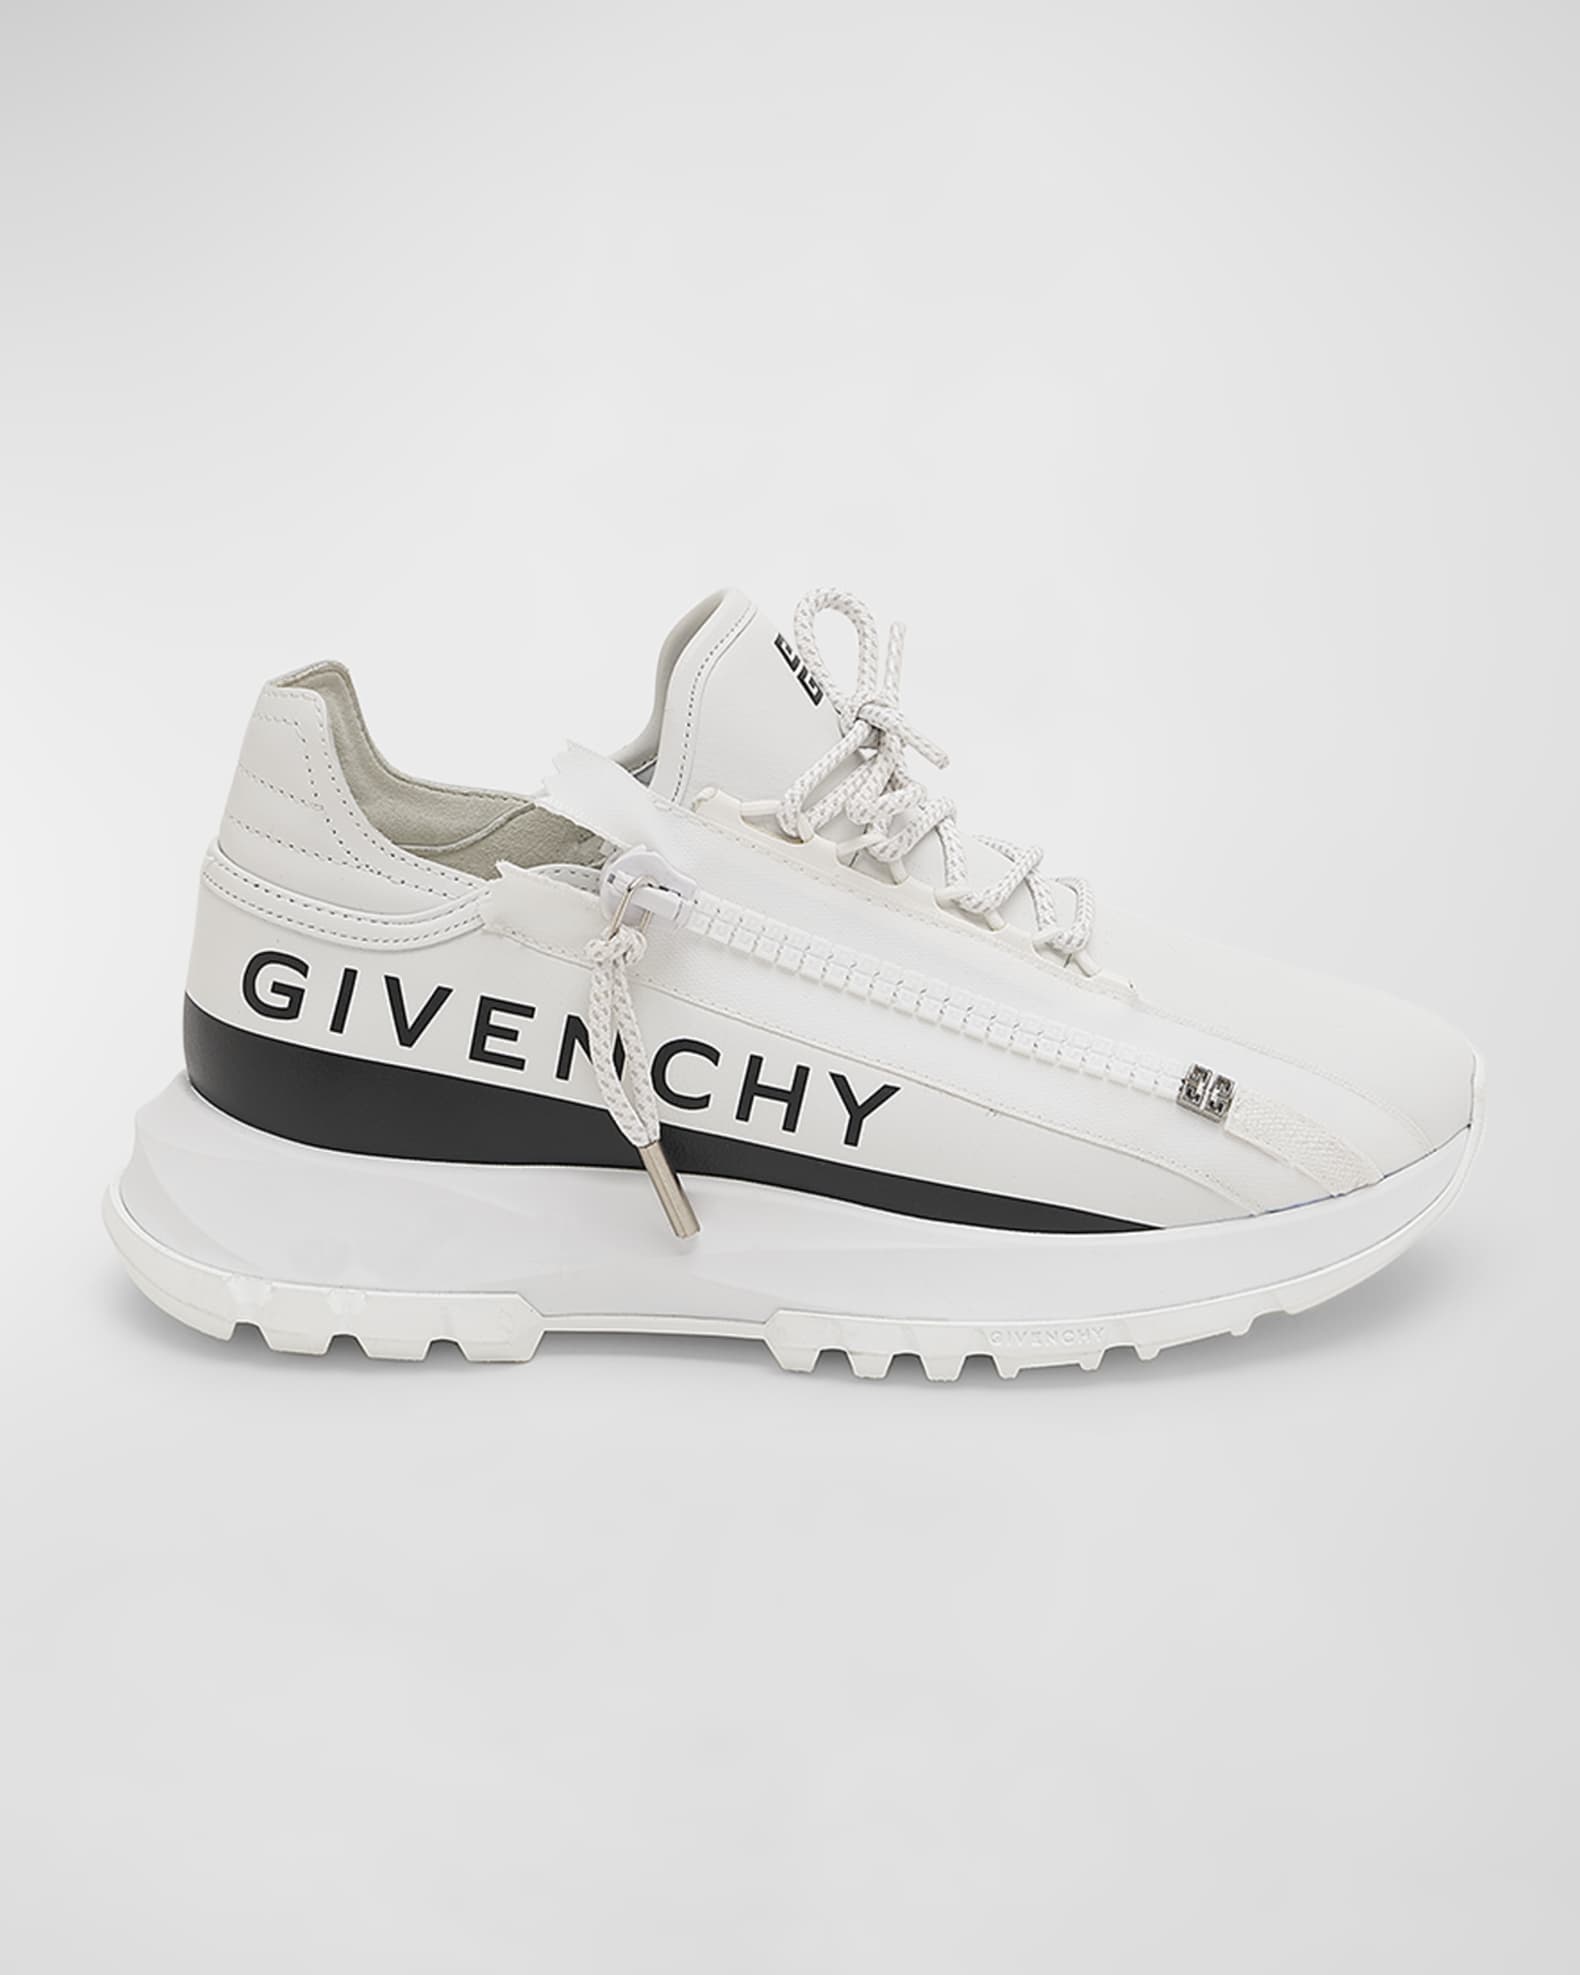 Givenchy Spectre Leather Zip Runner Sneakers | Neiman Marcus